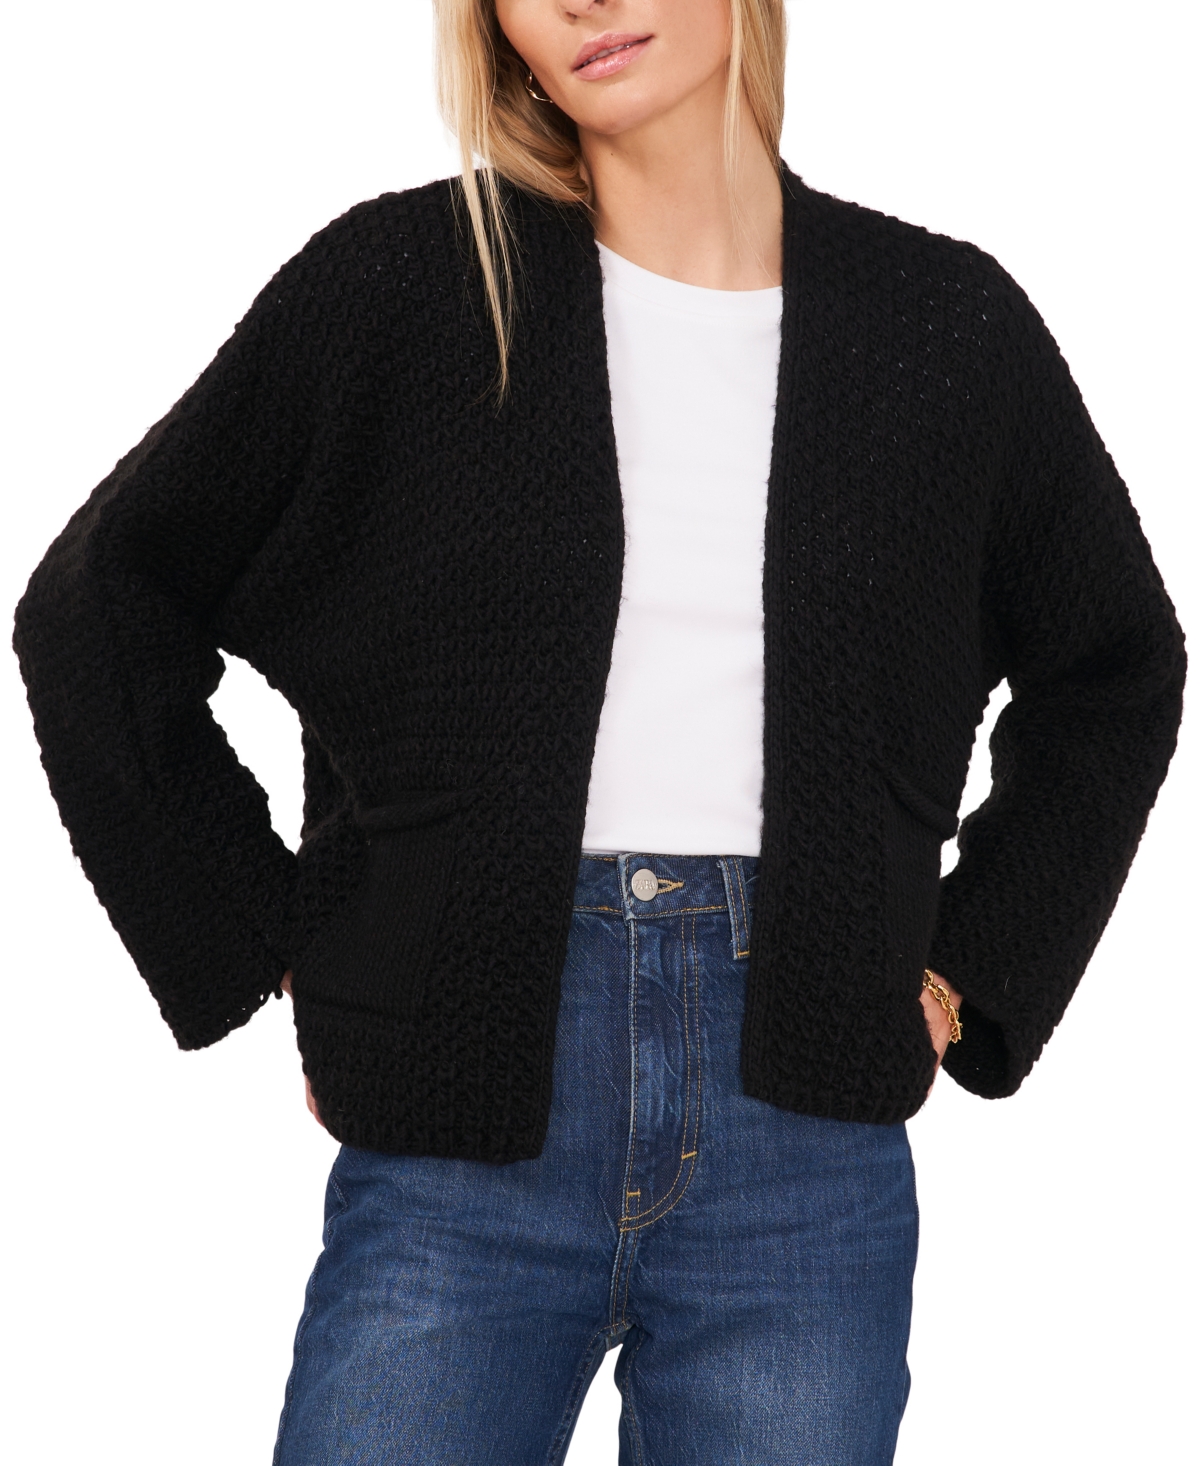 Vince Camuto Women's Collarless Open-Front Cardigan Sweater